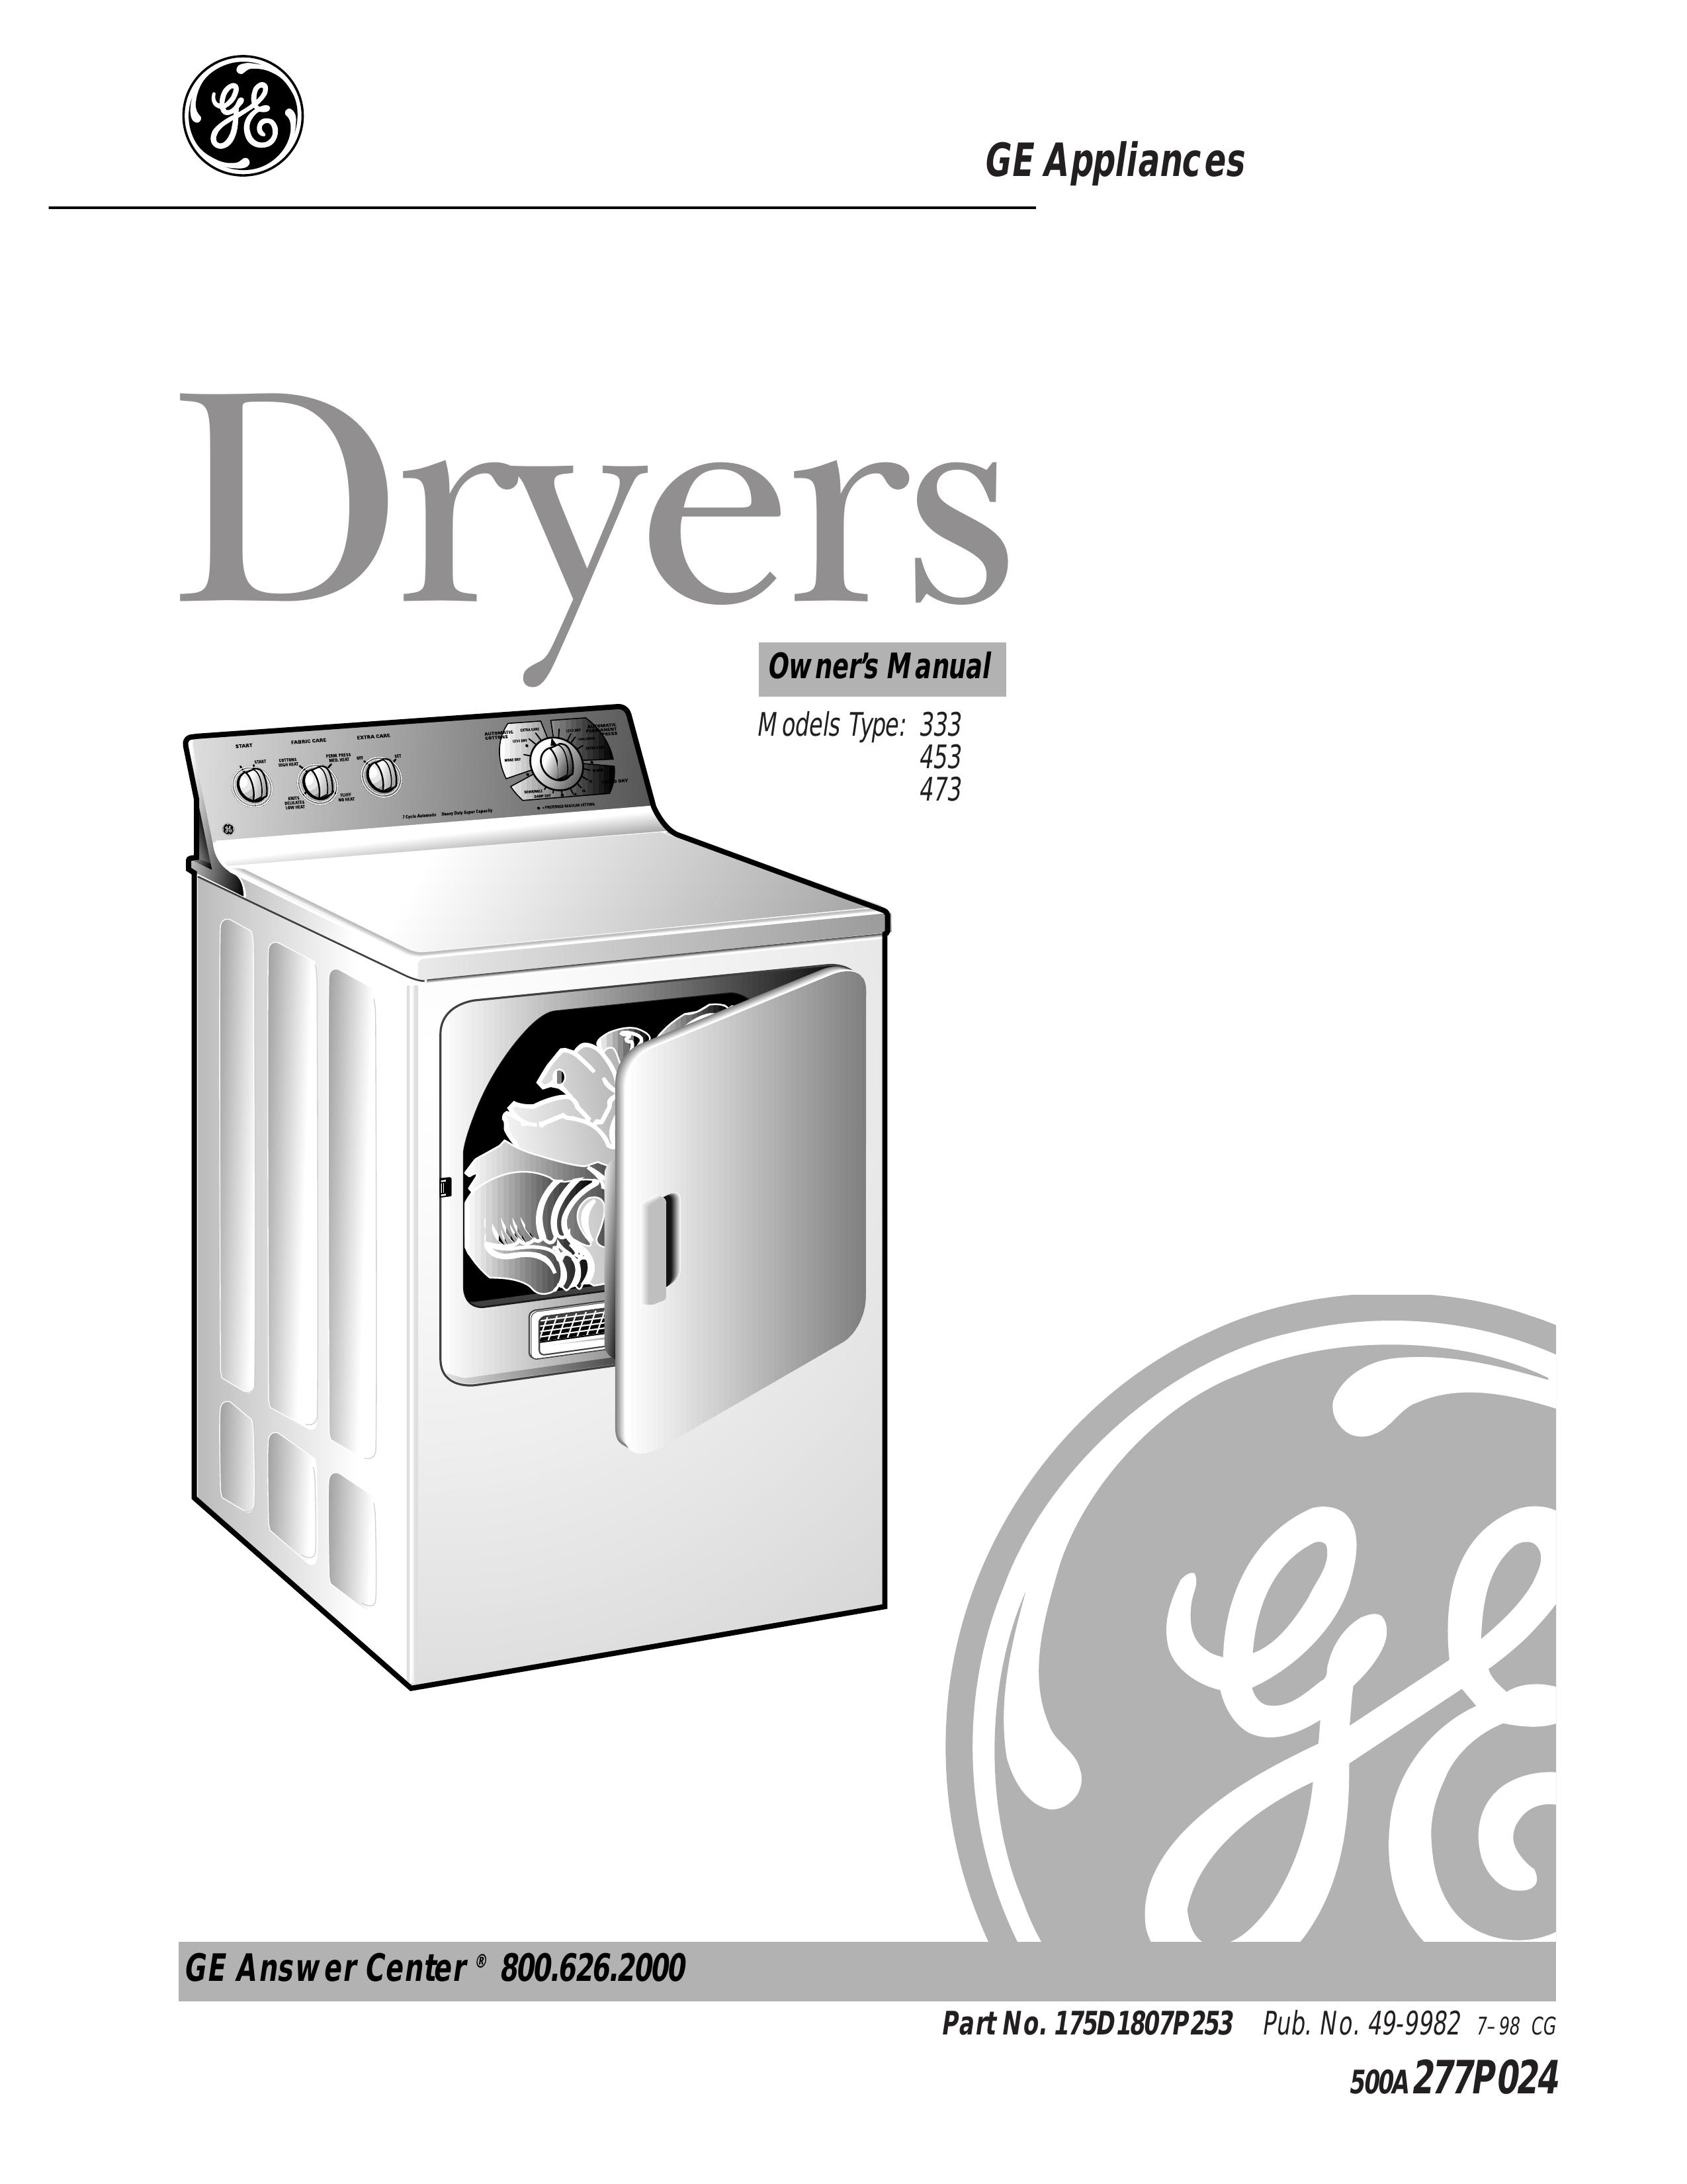 GE 453 Clothes Dryer User Manual